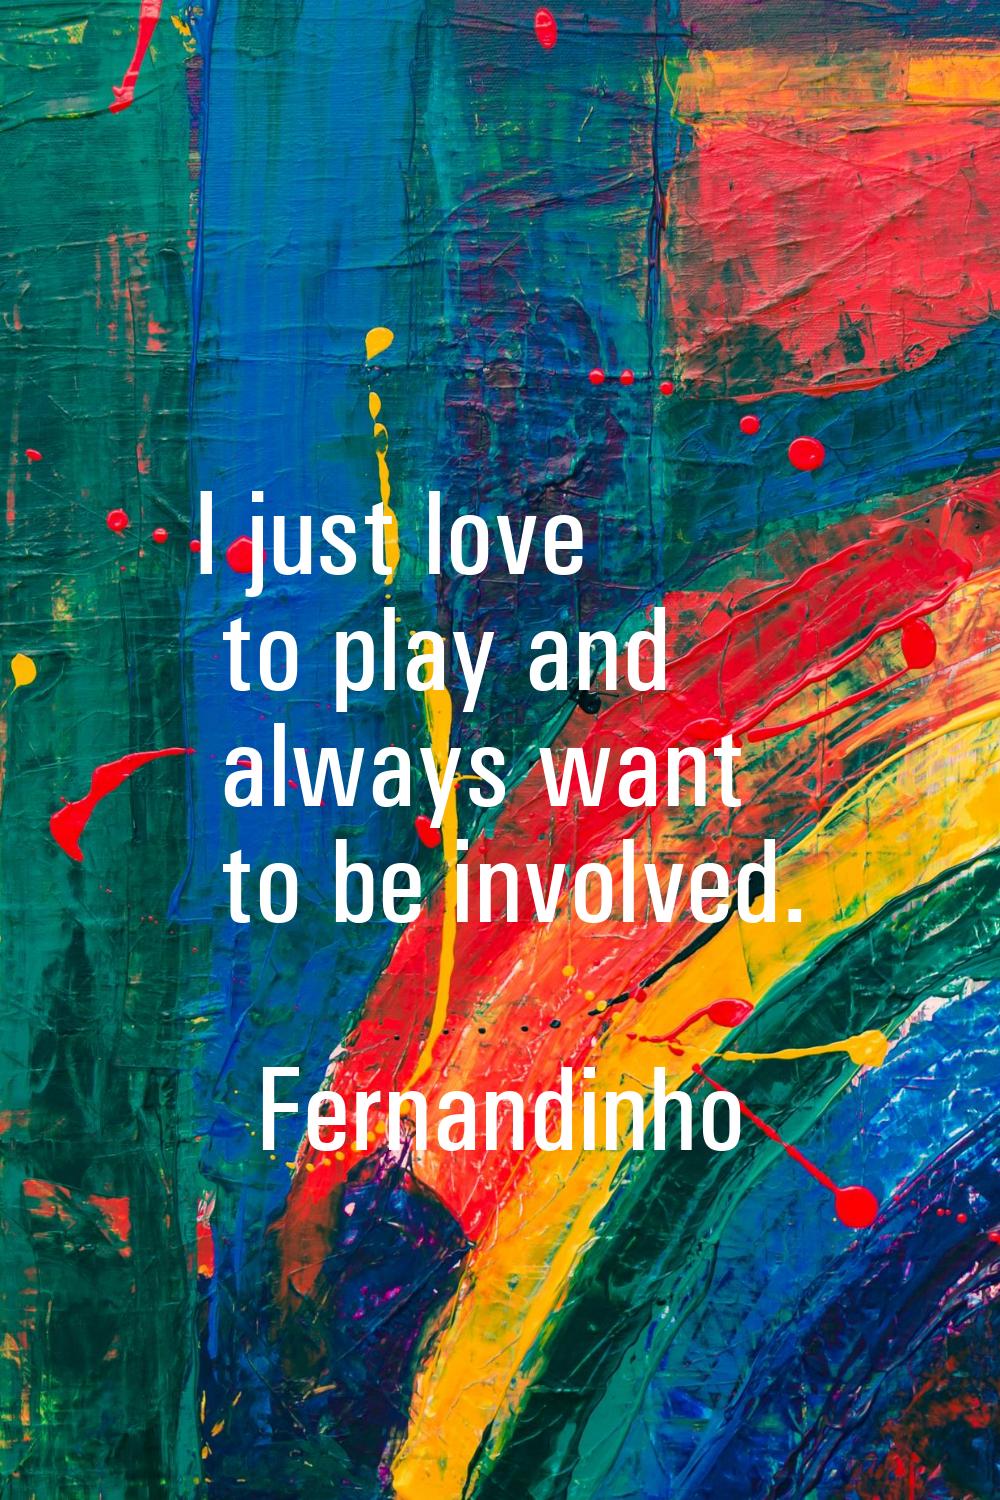 I just love to play and always want to be involved.